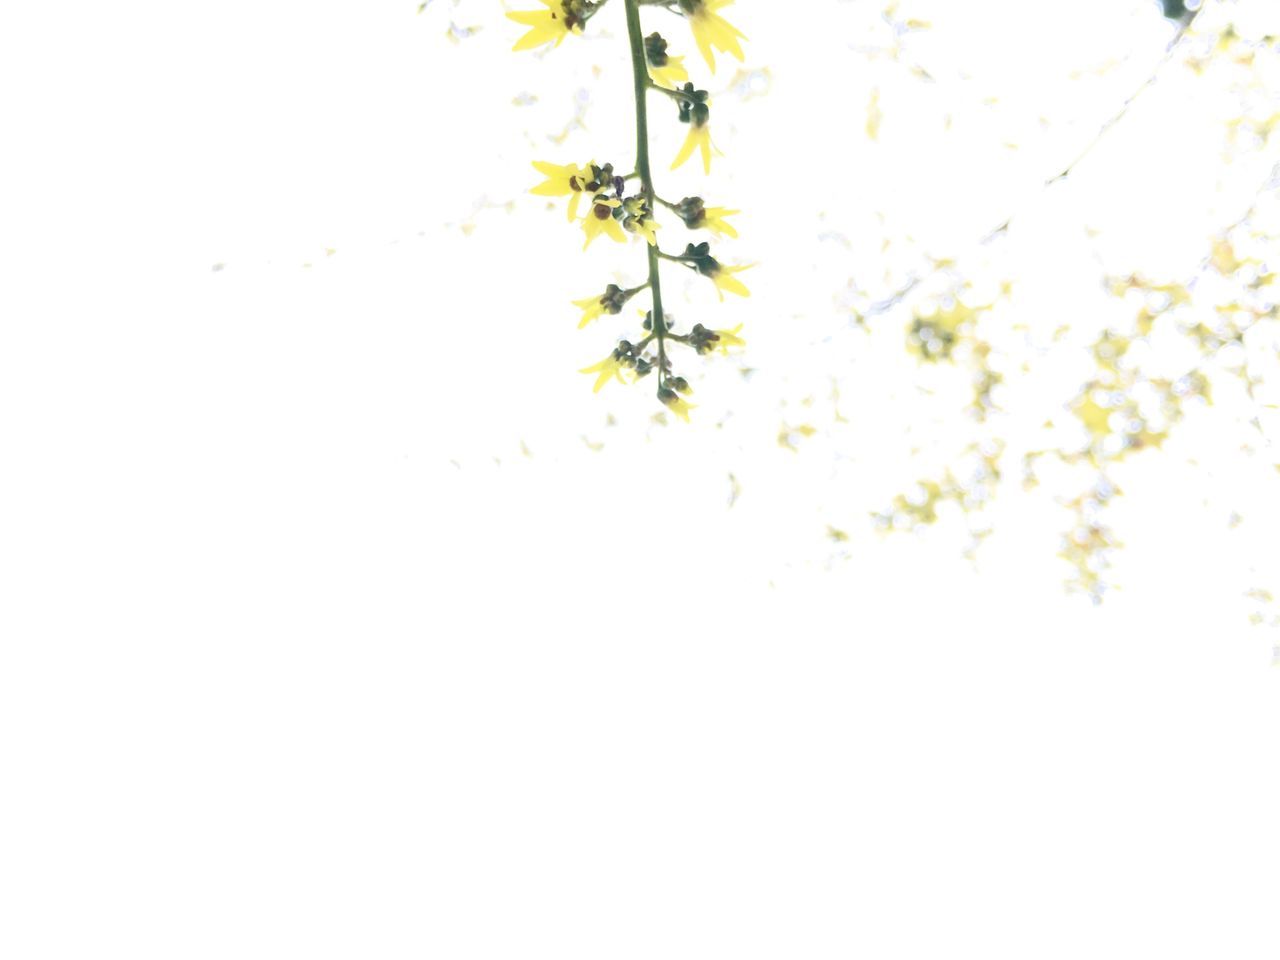 clear sky, copy space, growth, nature, beauty in nature, flower, branch, yellow, leaf, tree, low angle view, fragility, freshness, no people, tranquility, day, outdoors, season, plant, white color